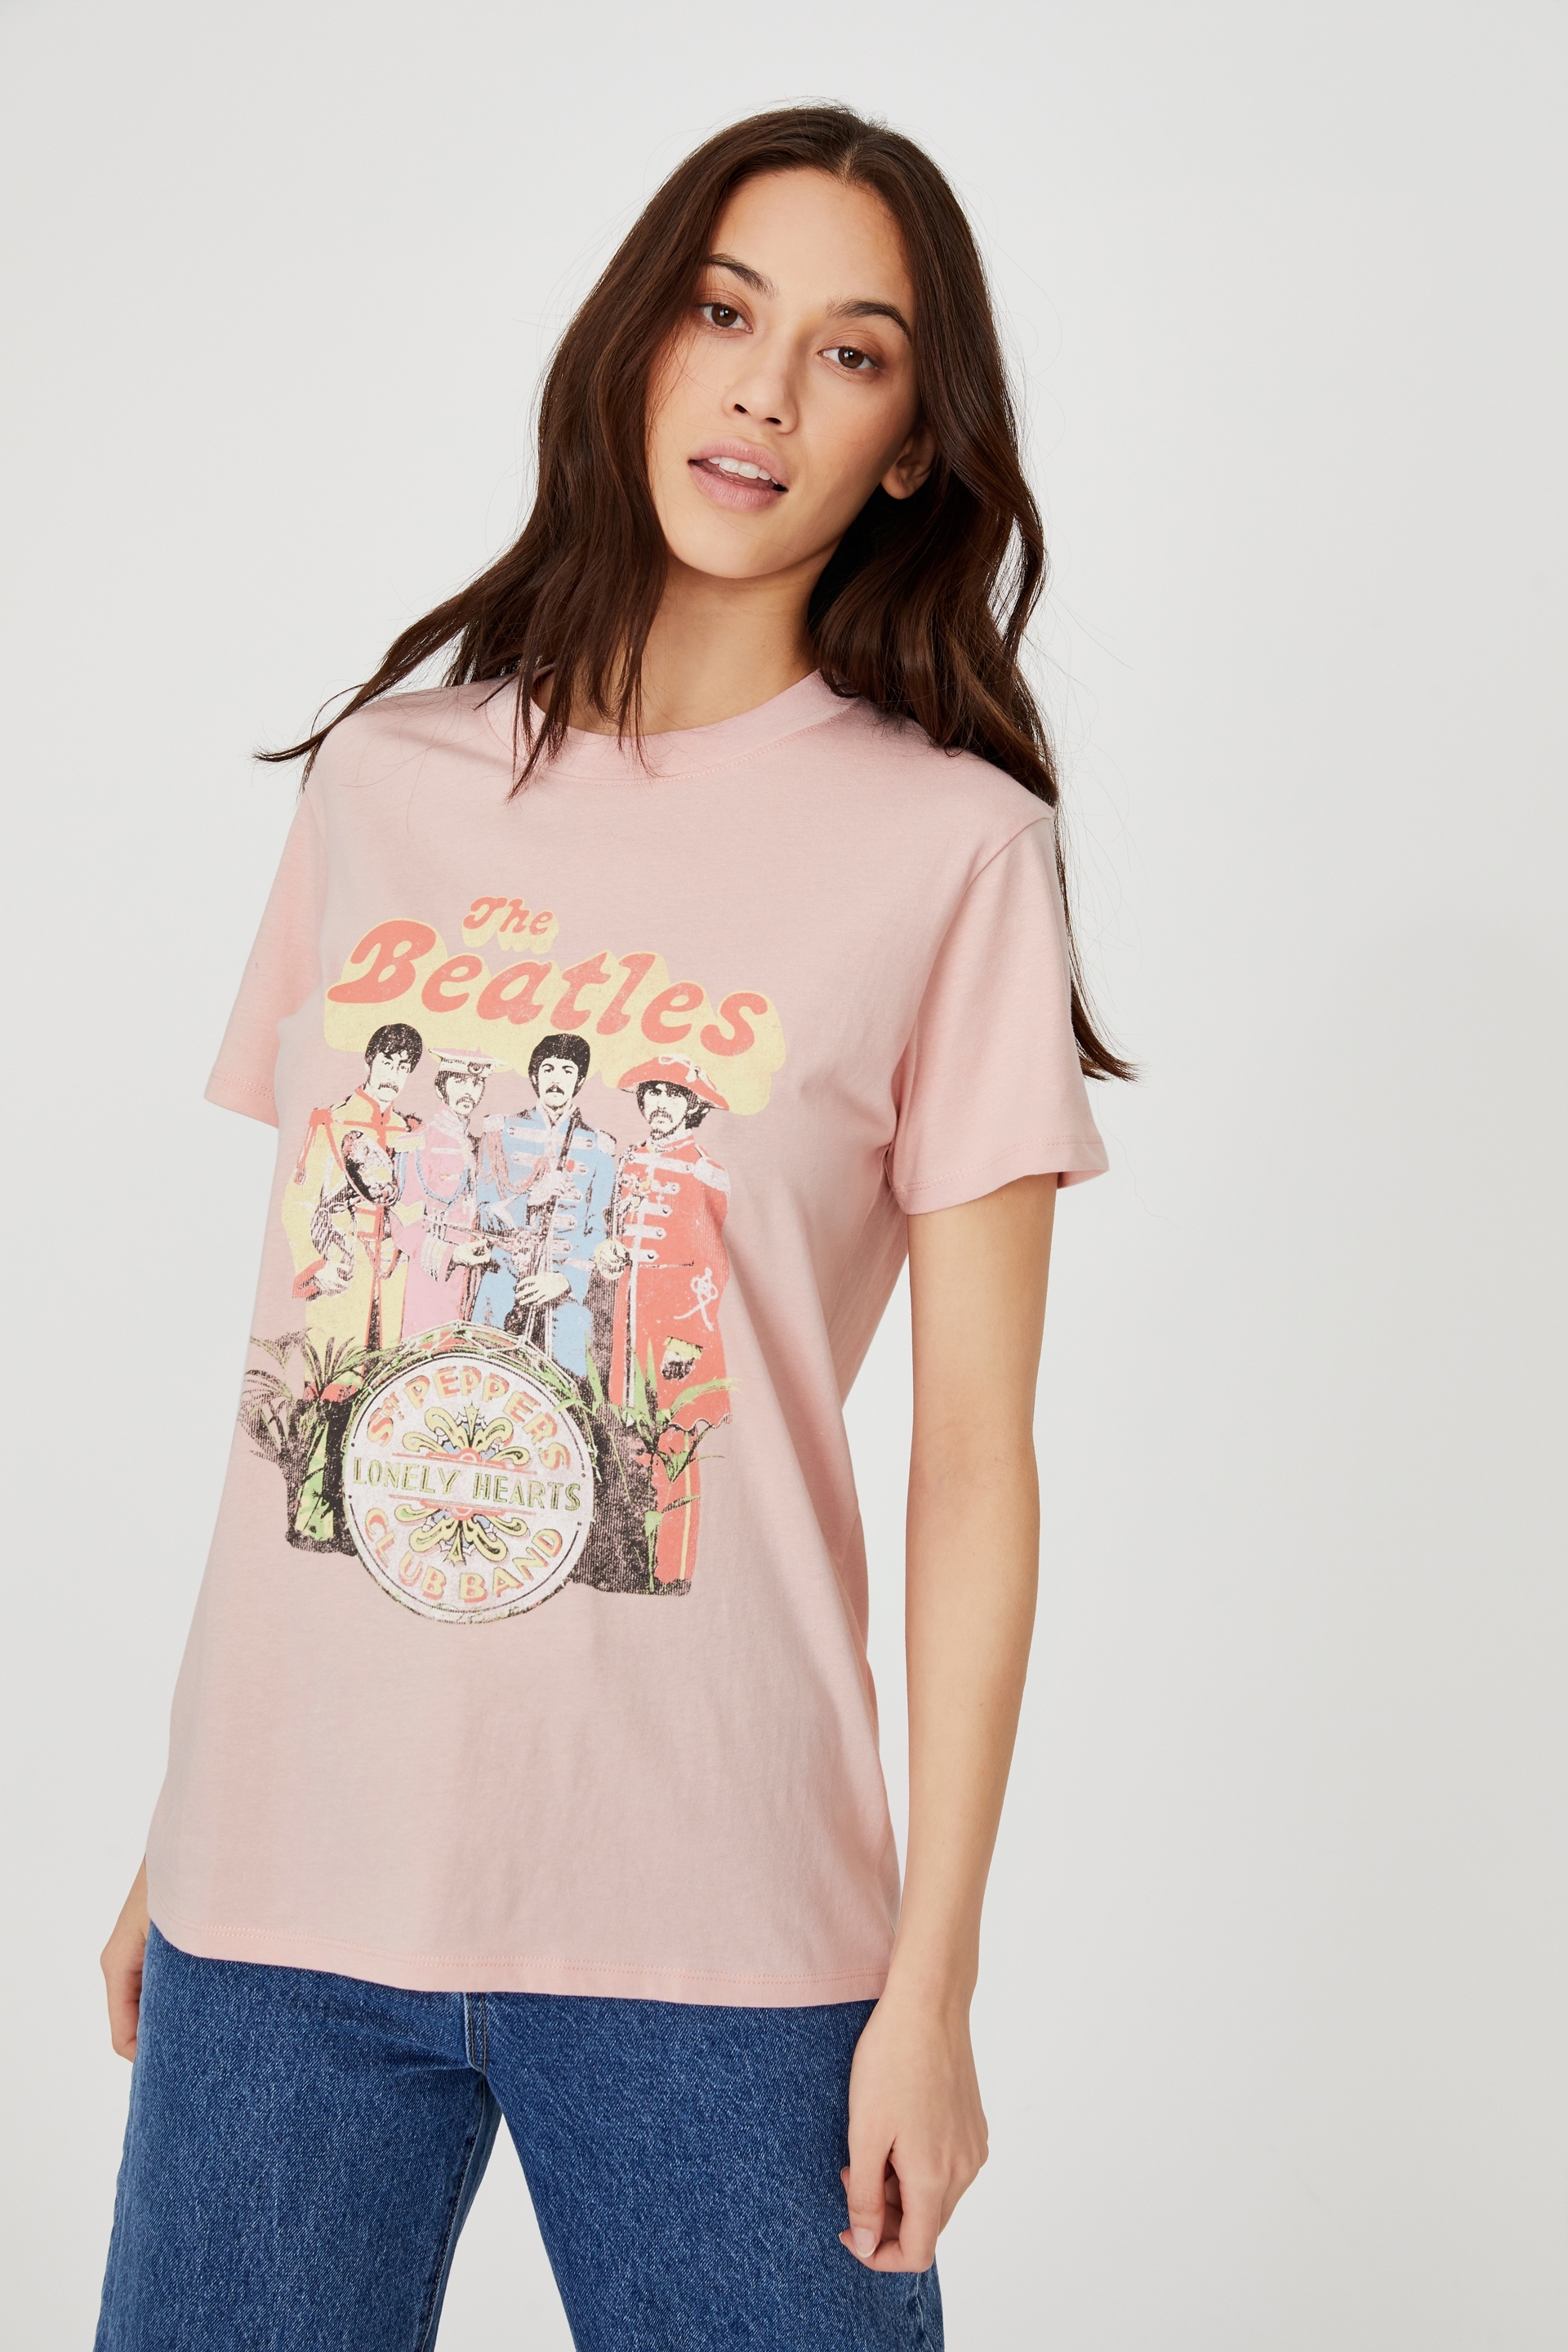 Cotton On Women - Classic Band T Shirt - Lcn app the beatles sgt peppers/pink glow